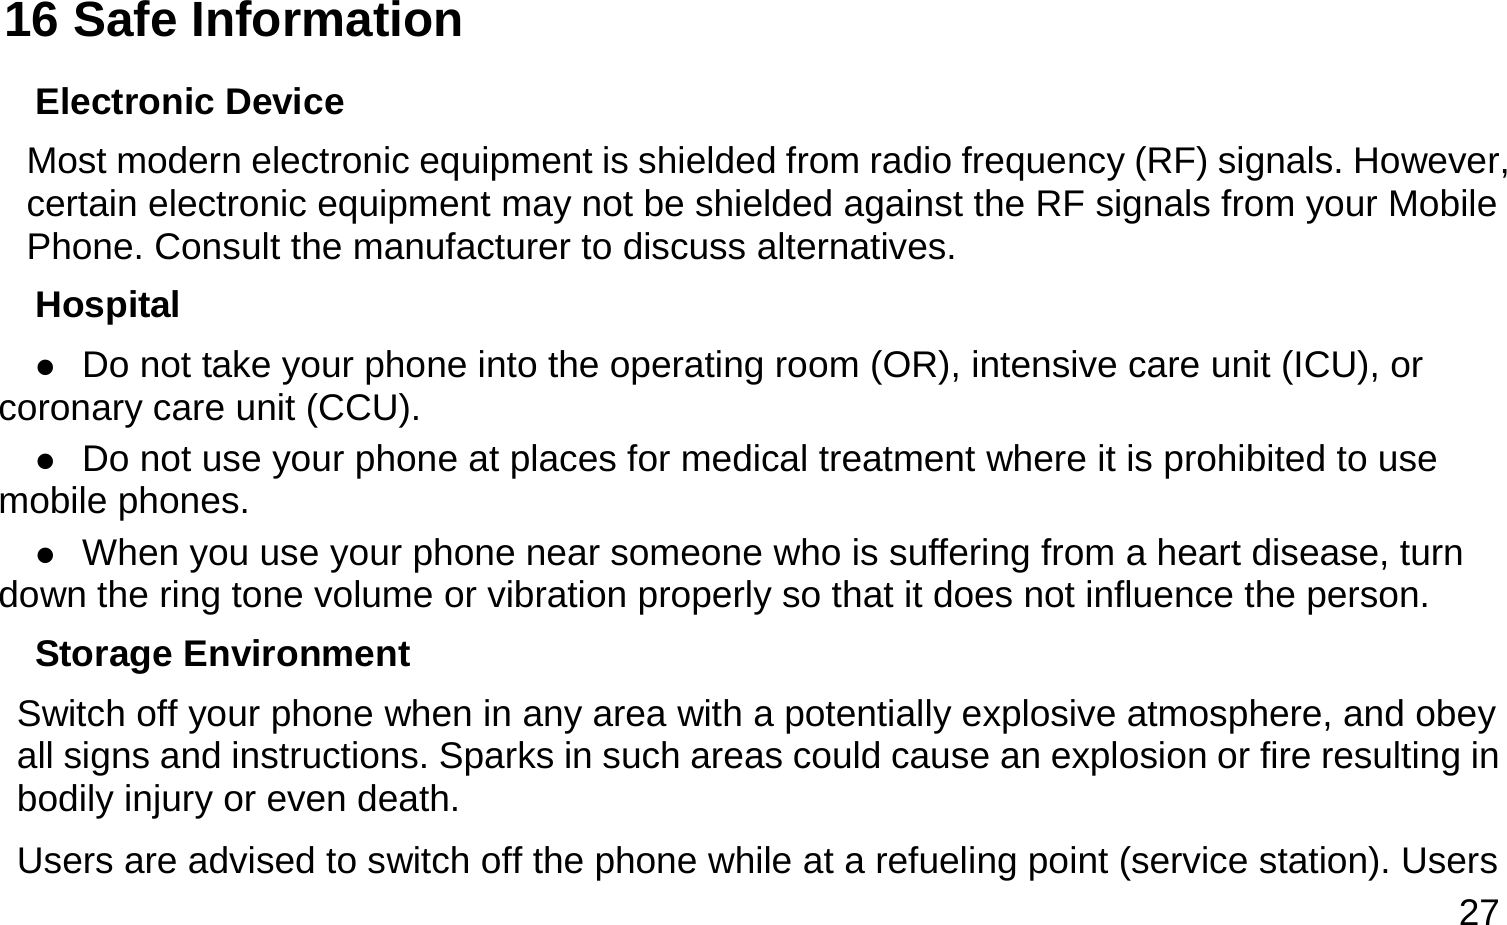  27 16 Safe Information Electronic Device Most modern electronic equipment is shielded from radio frequency (RF) signals. However, certain electronic equipment may not be shielded against the RF signals from your Mobile Phone. Consult the manufacturer to discuss alternatives. Hospital  Do not take your phone into the operating room (OR), intensive care unit (ICU), or coronary care unit (CCU).    Do not use your phone at places for medical treatment where it is prohibited to use mobile phones.  When you use your phone near someone who is suffering from a heart disease, turn down the ring tone volume or vibration properly so that it does not influence the person.   Storage Environment Switch off your phone when in any area with a potentially explosive atmosphere, and obey all signs and instructions. Sparks in such areas could cause an explosion or fire resulting in bodily injury or even death. Users are advised to switch off the phone while at a refueling point (service station). Users 